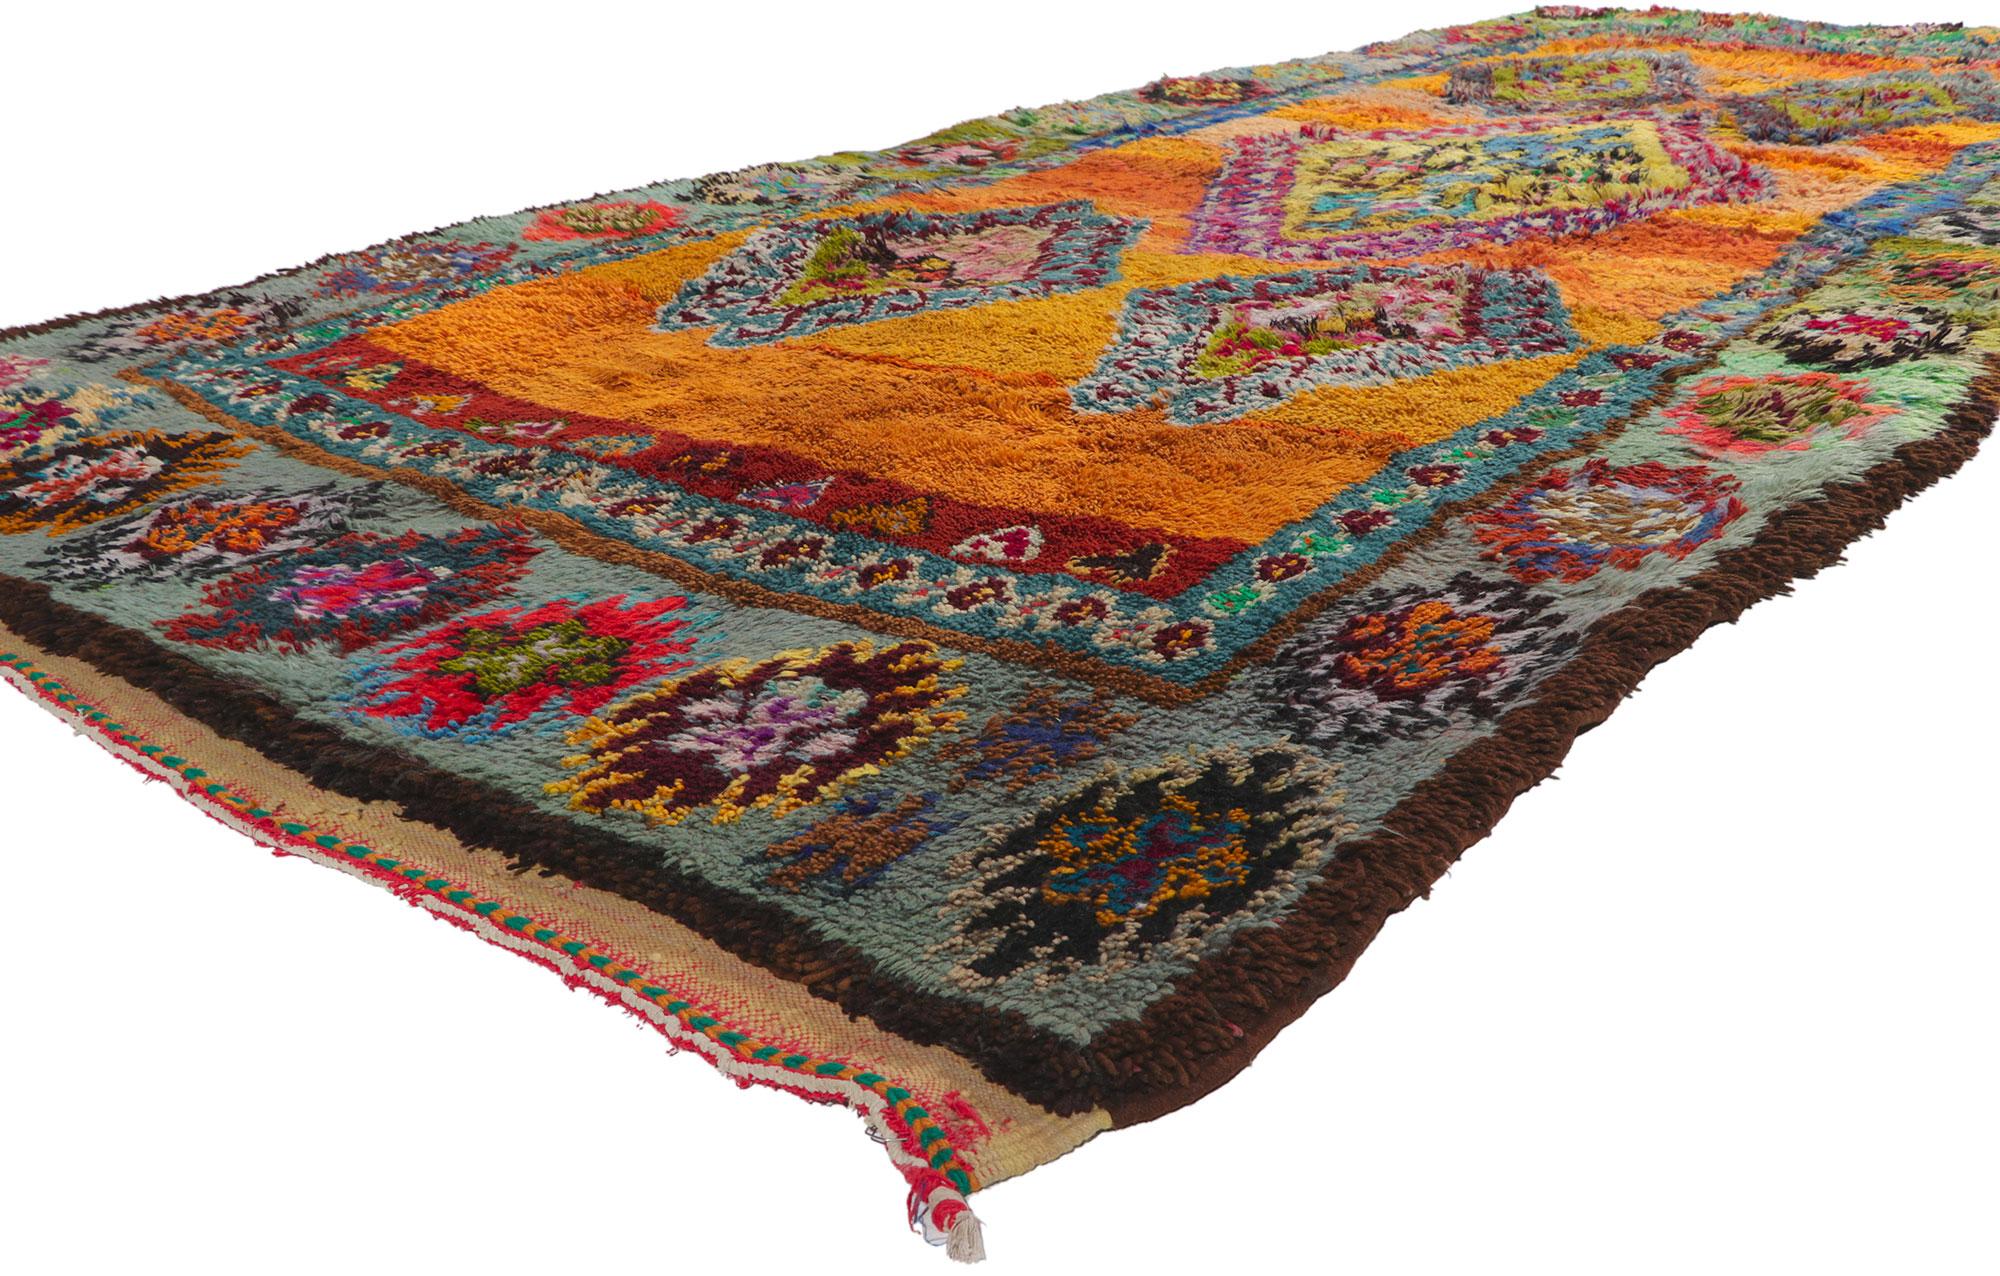 21672 vintage Berber Moroccan Boujad rug, 06'00 x 13'04. Showcasing a bold expressive design, incredible detail and texture, this hand knotted wool vintage Berber Moroccan Boujad rug is a captivating vision of woven beauty. The eye-catching tribal